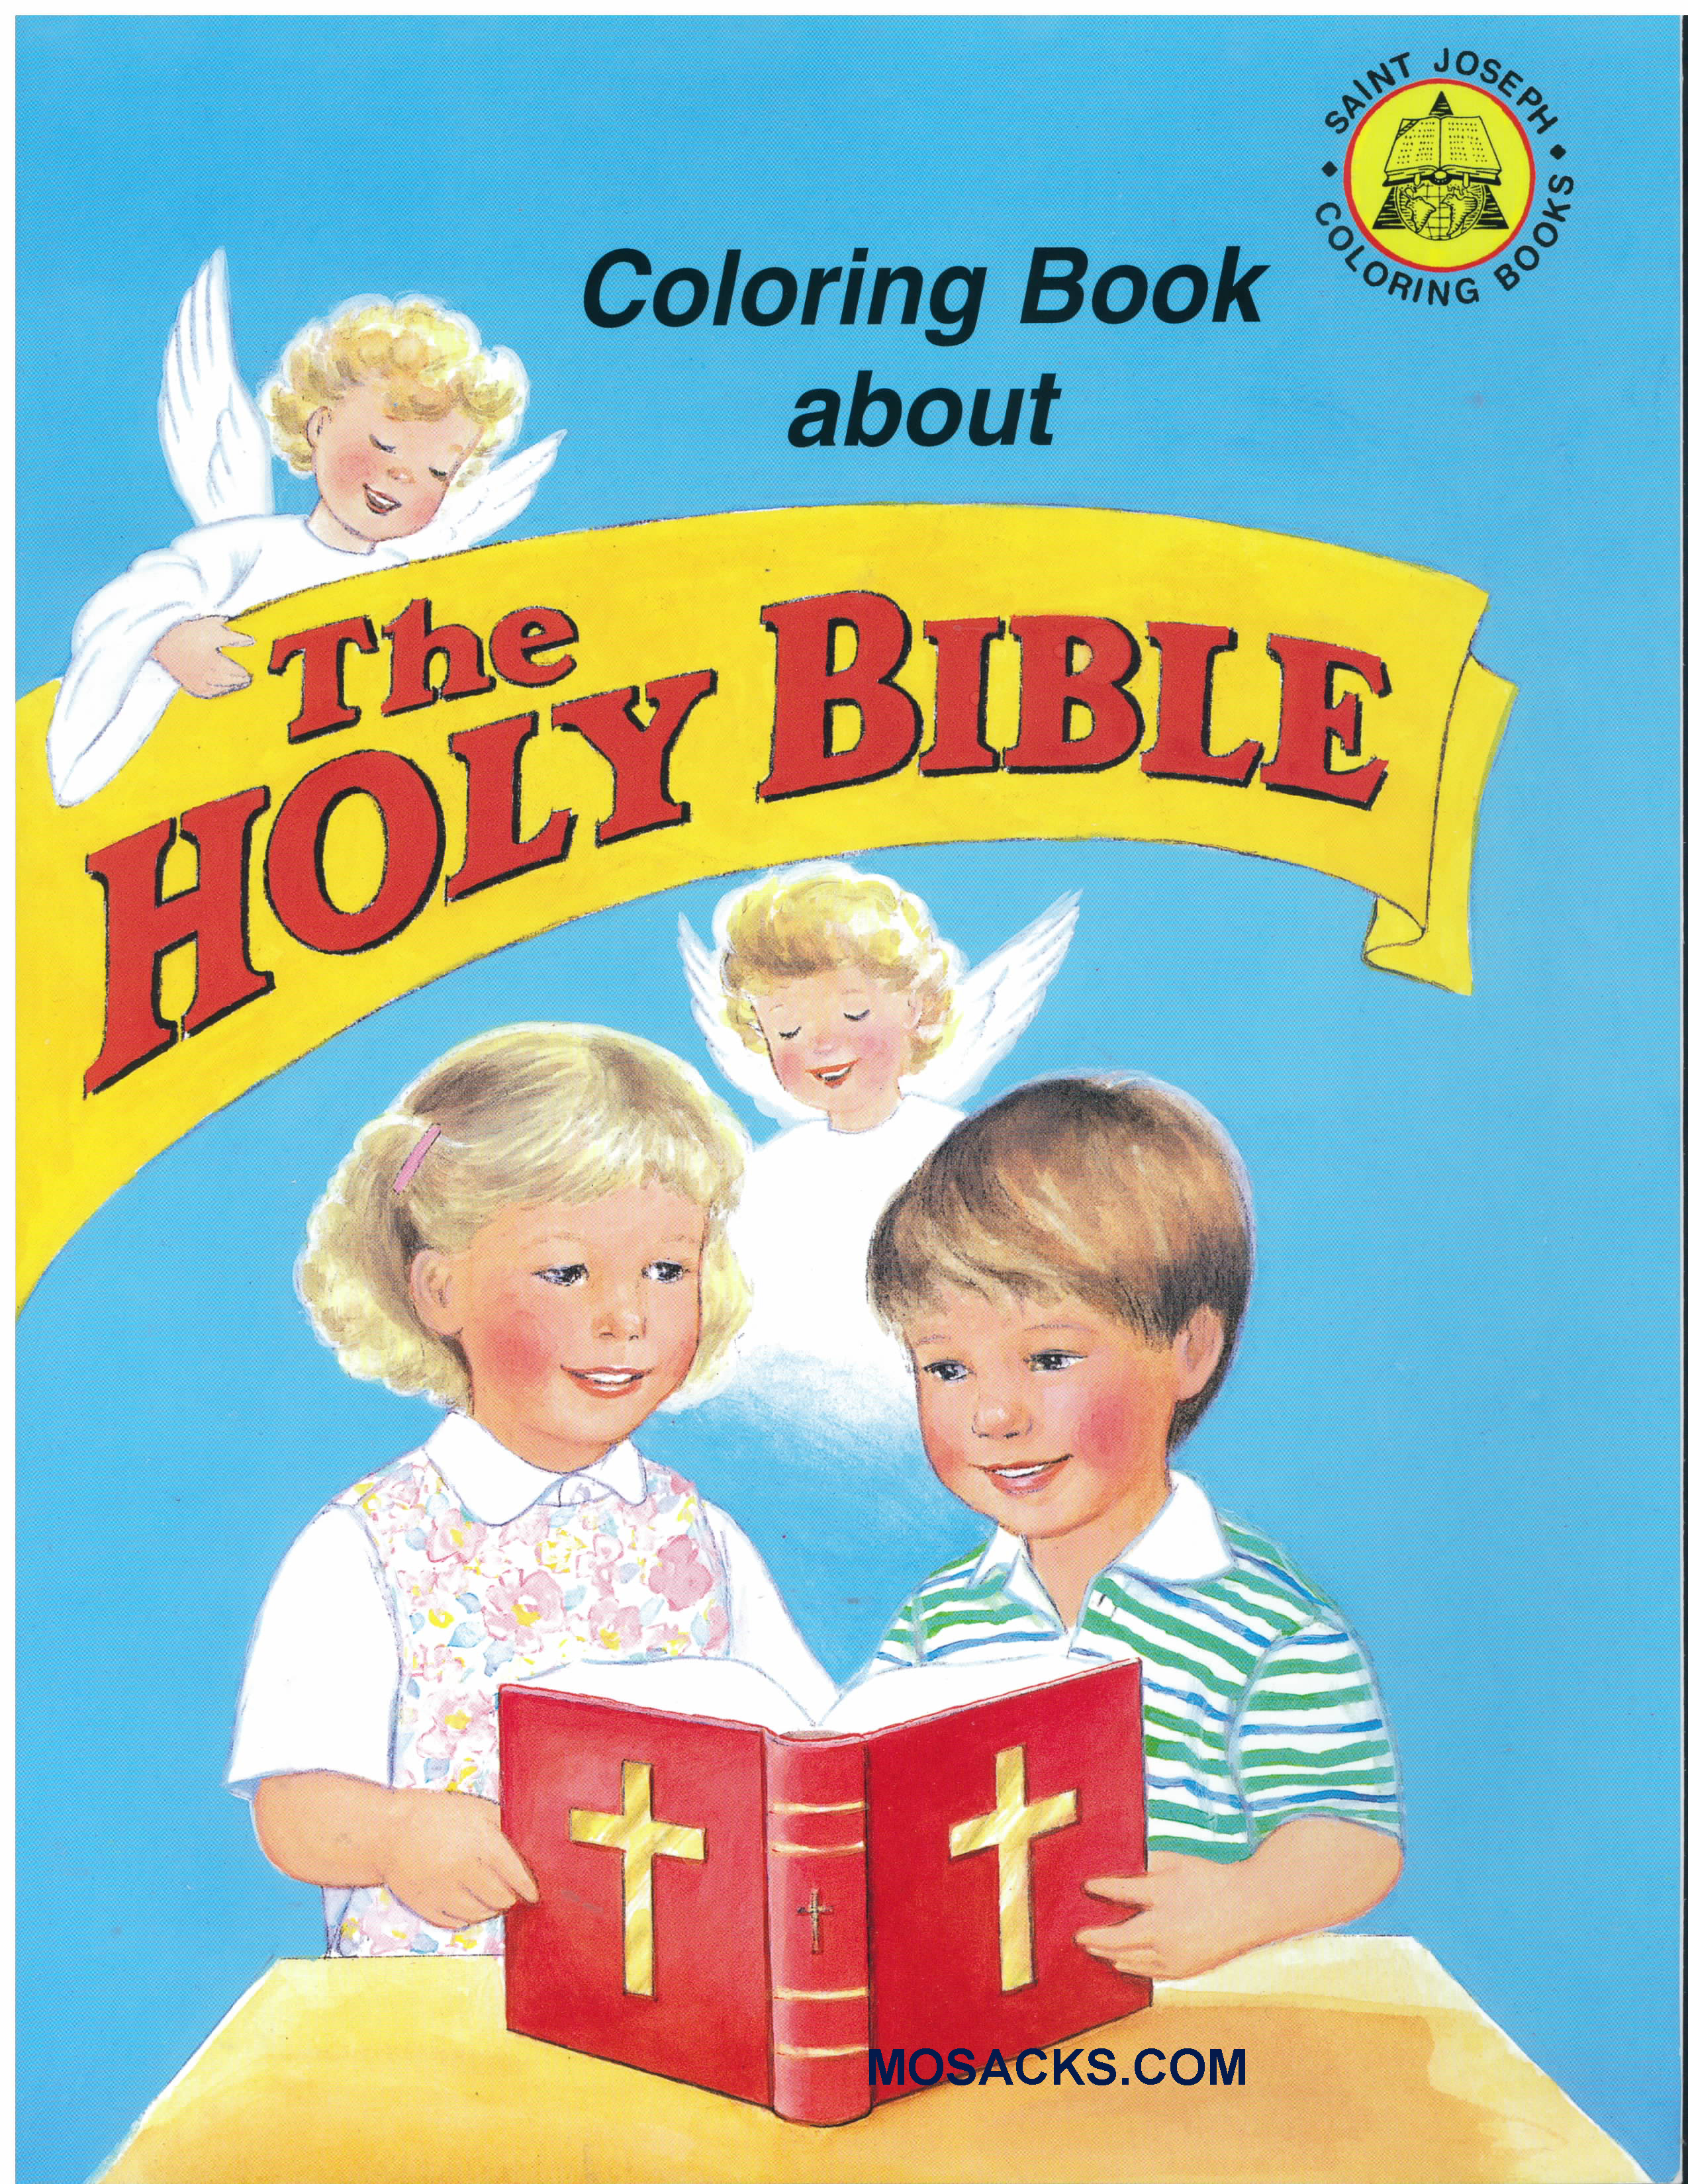 Coloring Book About The Holy Bible-676